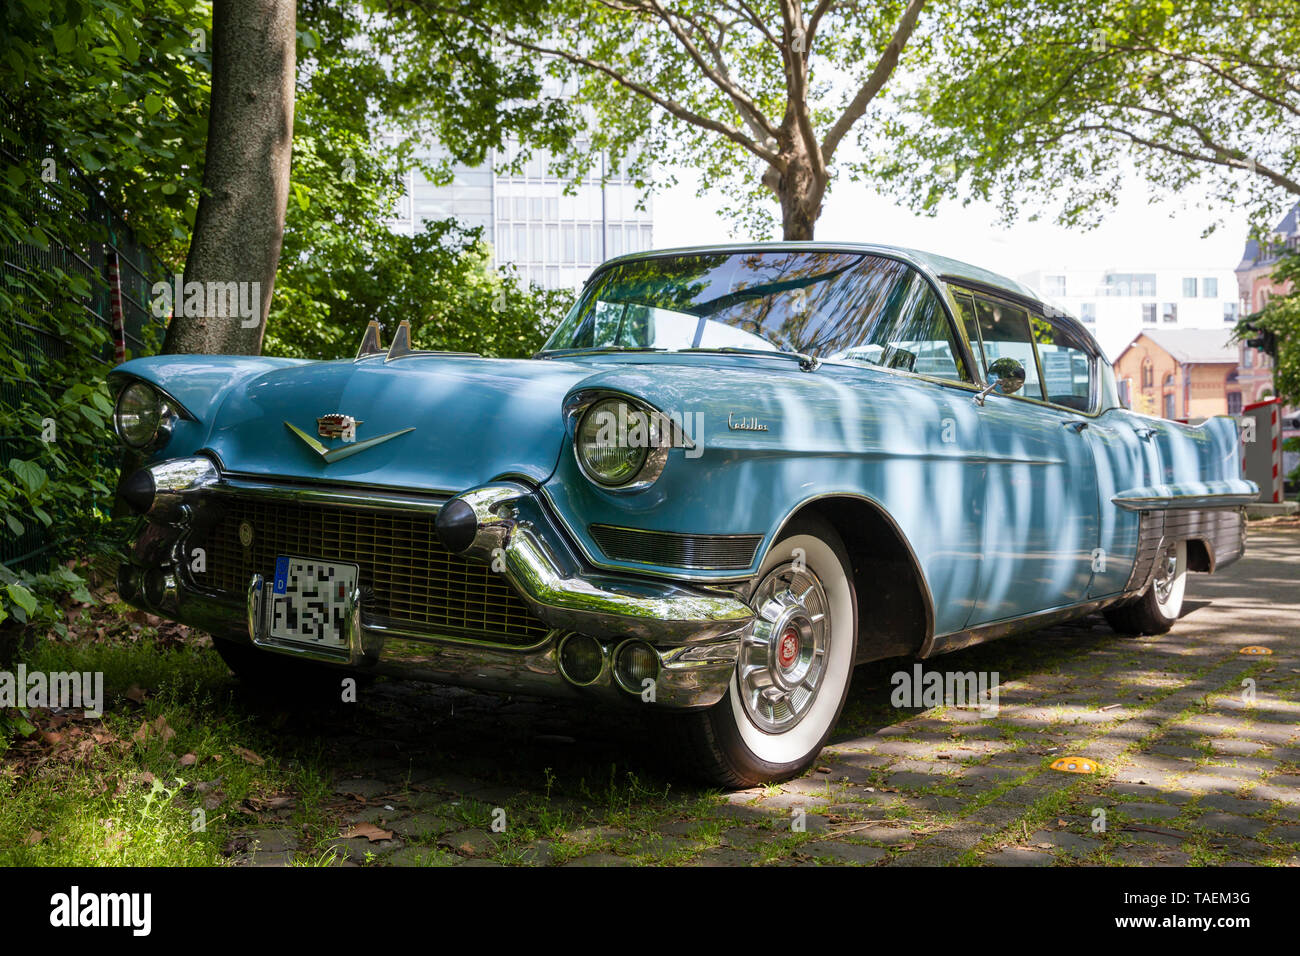 a Cadillac Fleetwood Series 75 from 1957.  ein Cadillac Fleetwood Series 75 von 1957. Stock Photo